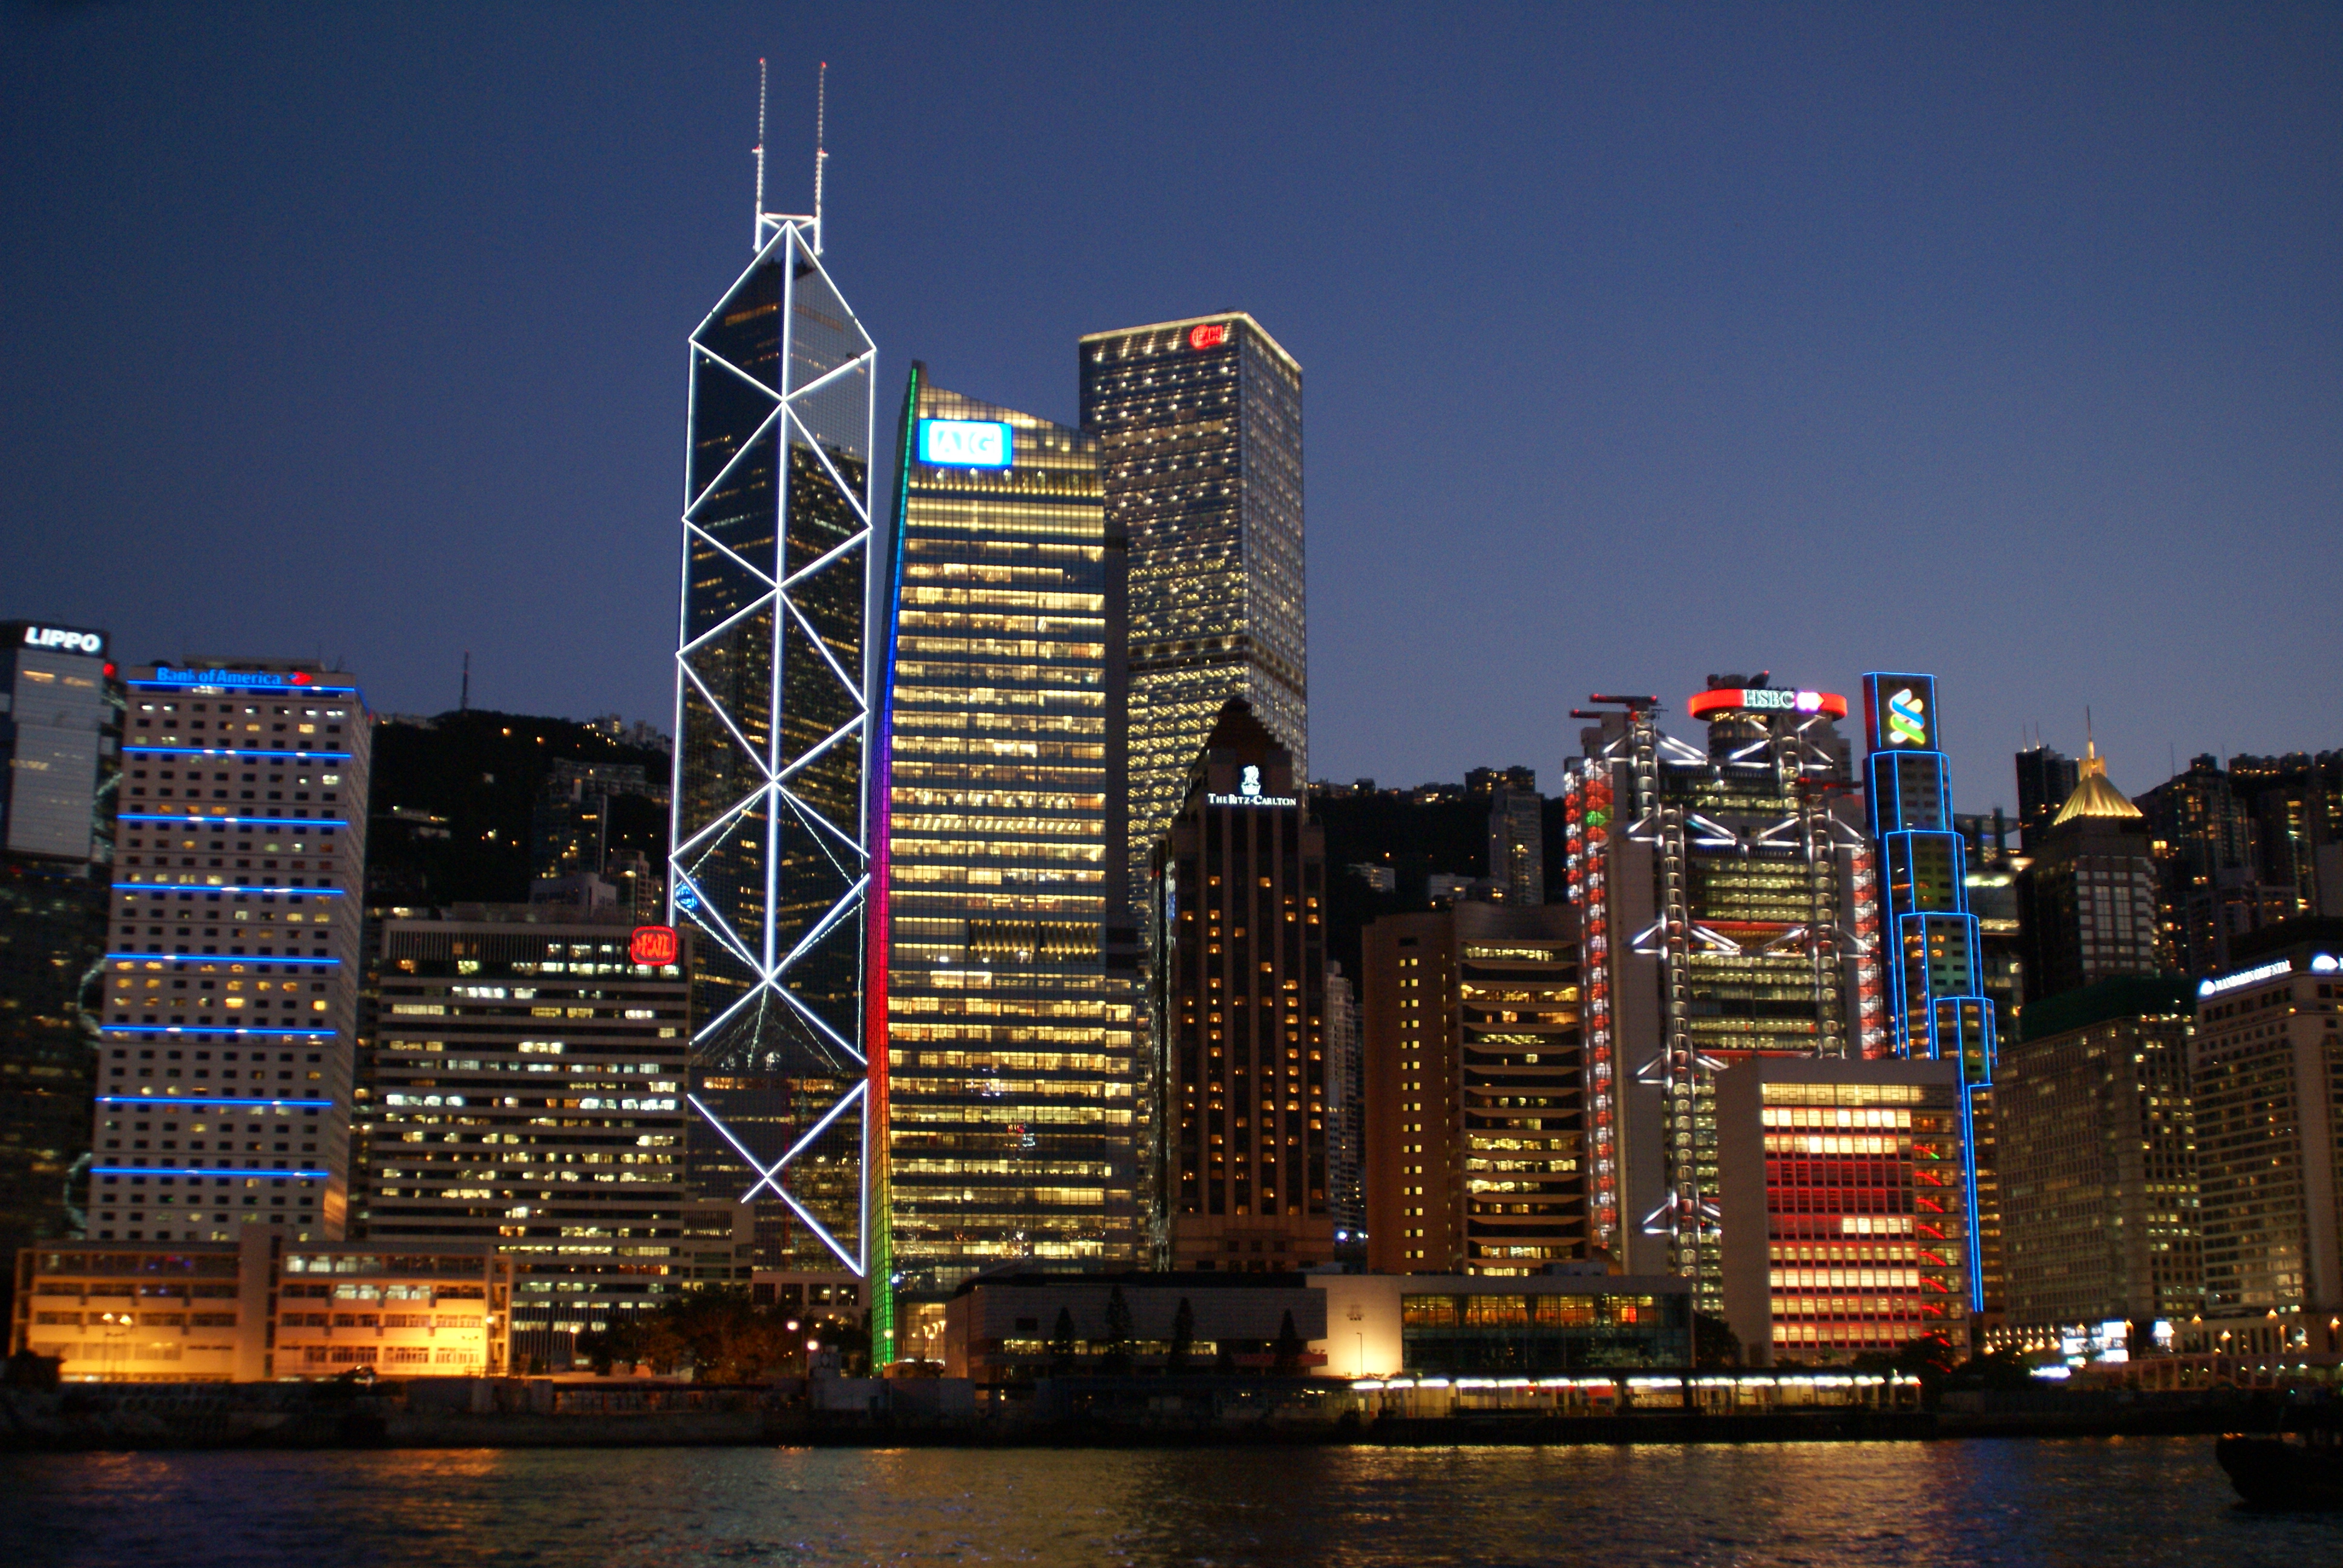 File:Central Hong Kong From a Boat.jpg - Wikimedia Commons